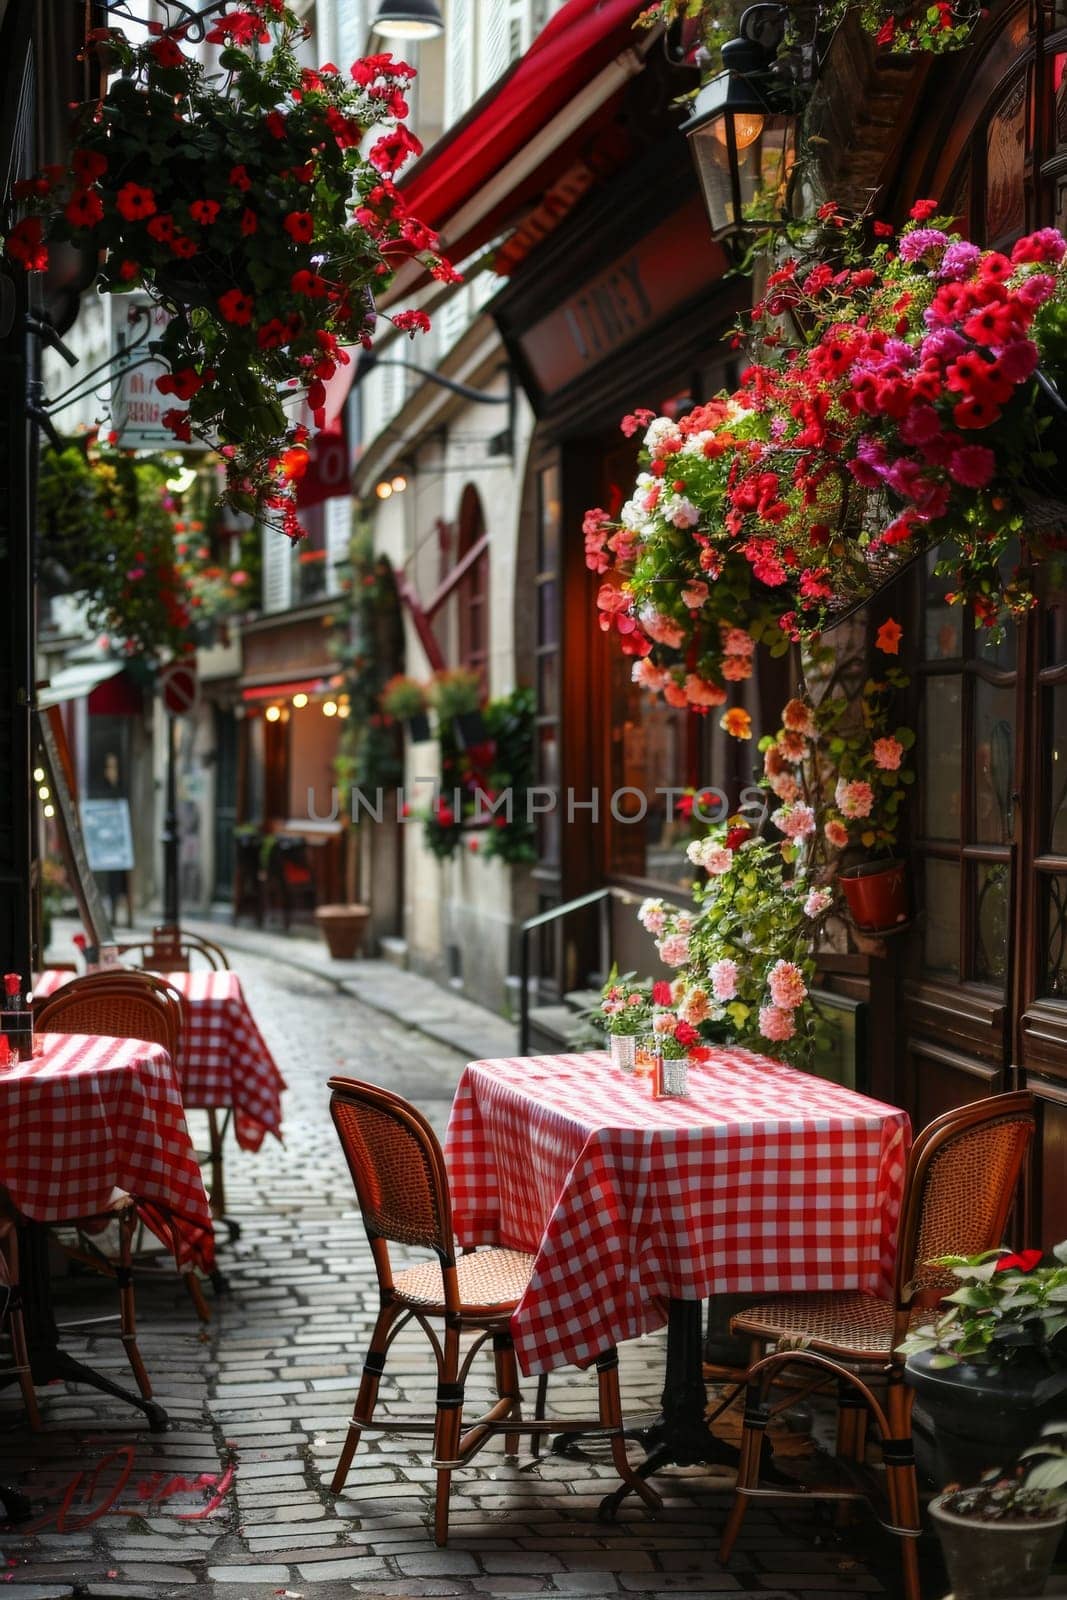 A row of tables with red and white checkered tablecloths and chairs are set up on a cobblestone street. The tables are surrounded by potted plants and flowers, creating a cozy and inviting atmosphere